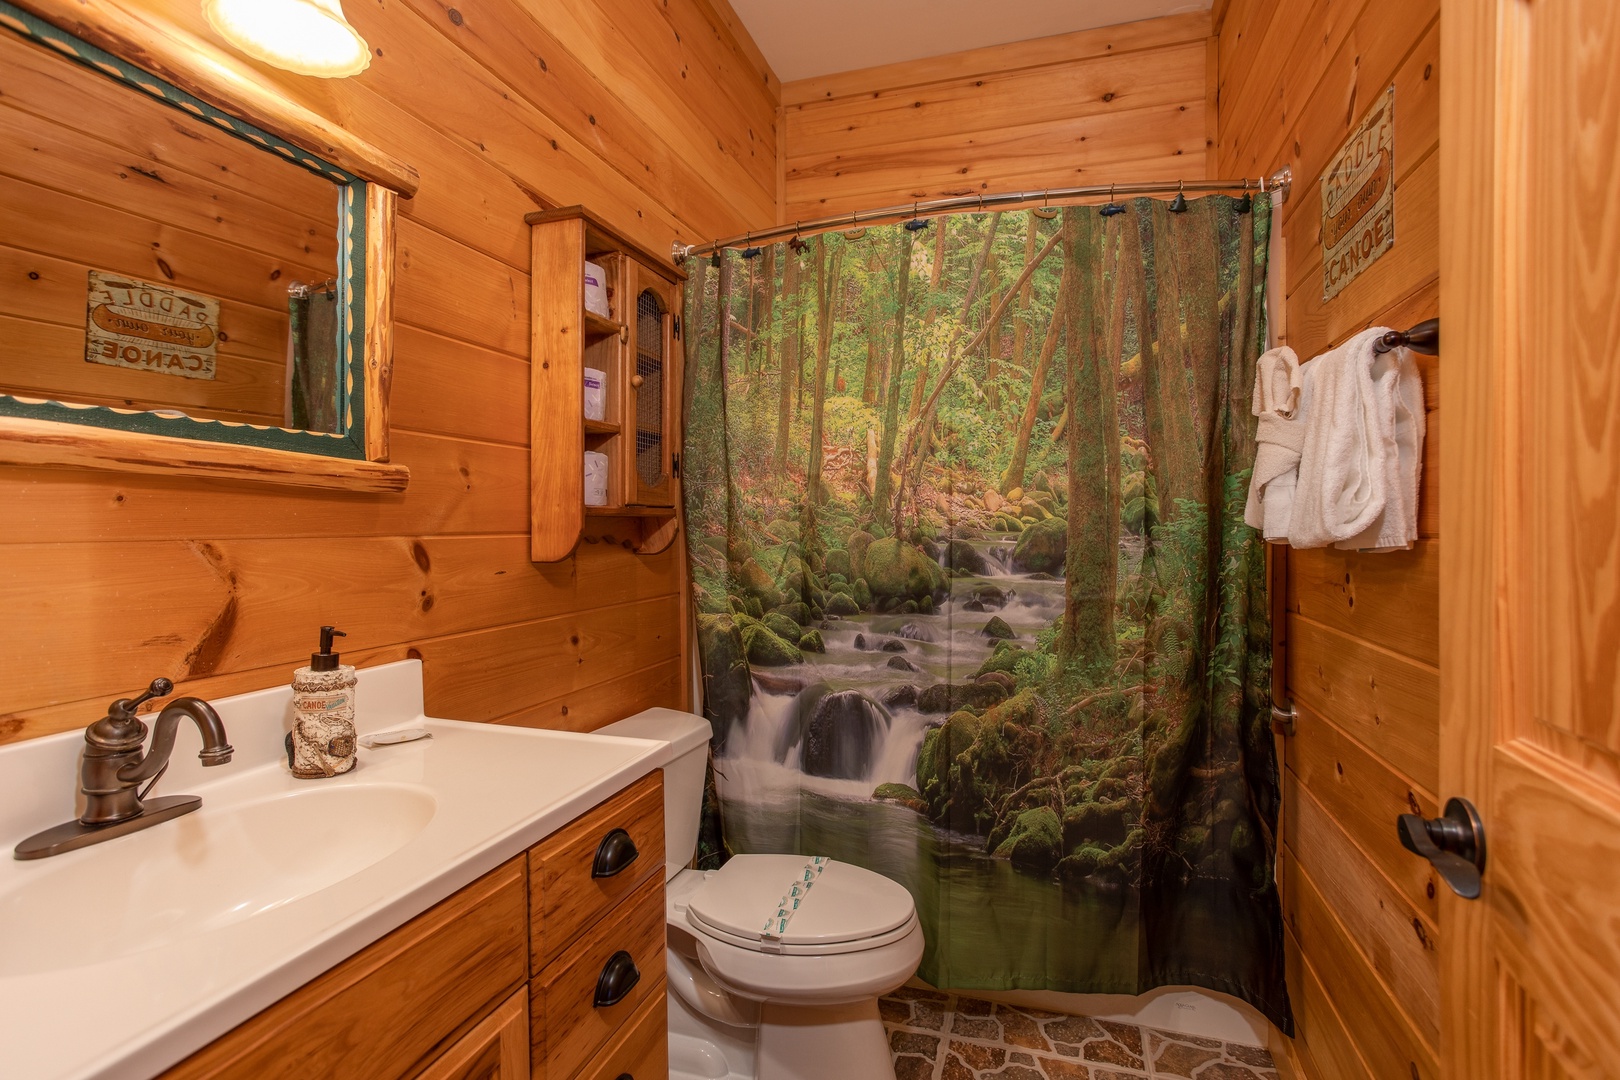 Bathroom with a tub and shower at Great View Lodge, a 5-bedroom cabin rental located in Pigeon Forge